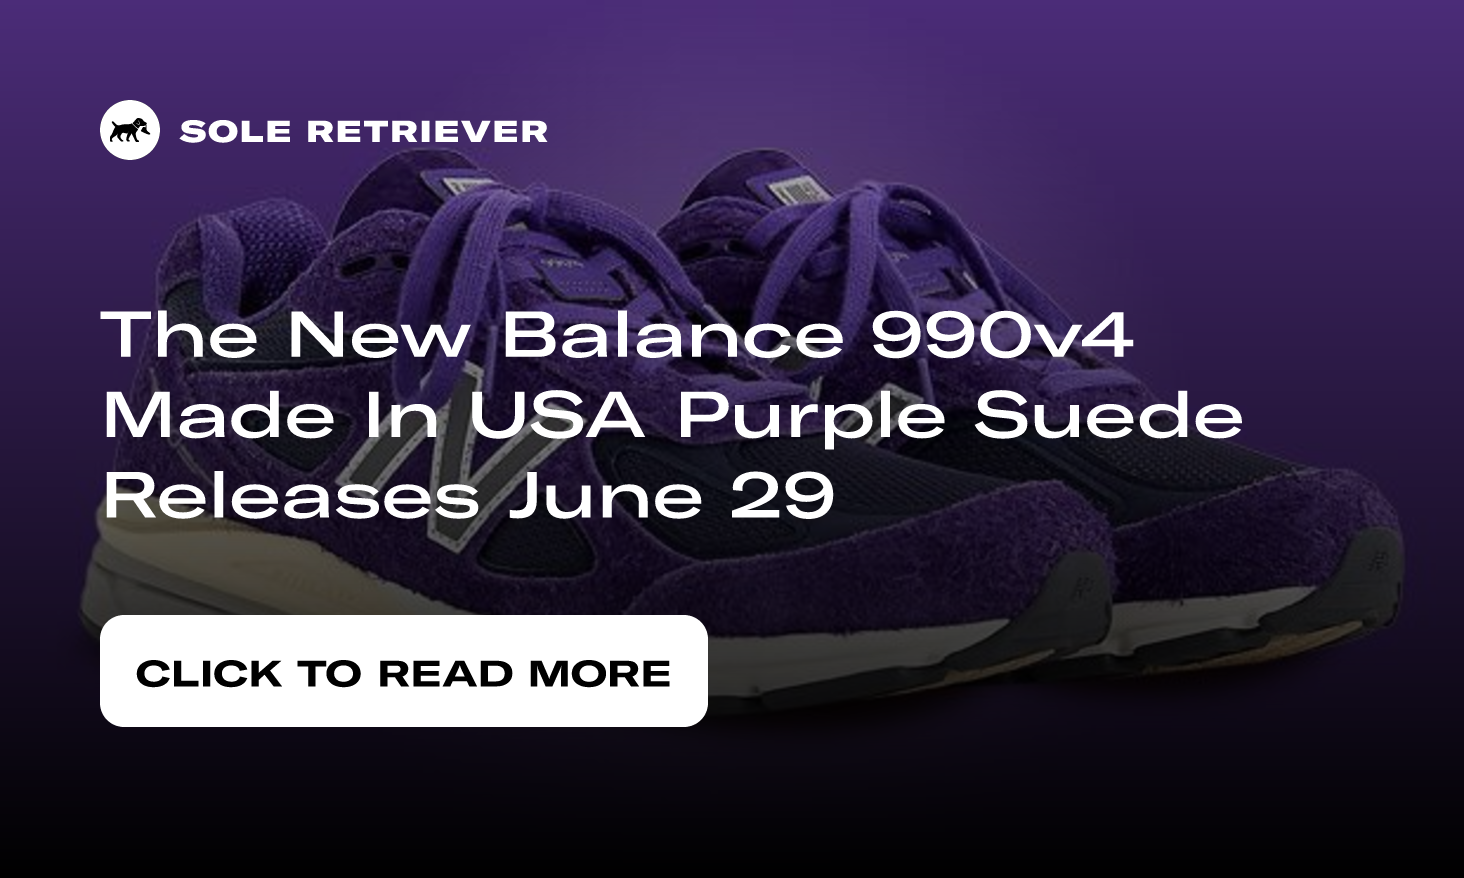 The New Balance 990v4 Made In USA Purple Suede Releases